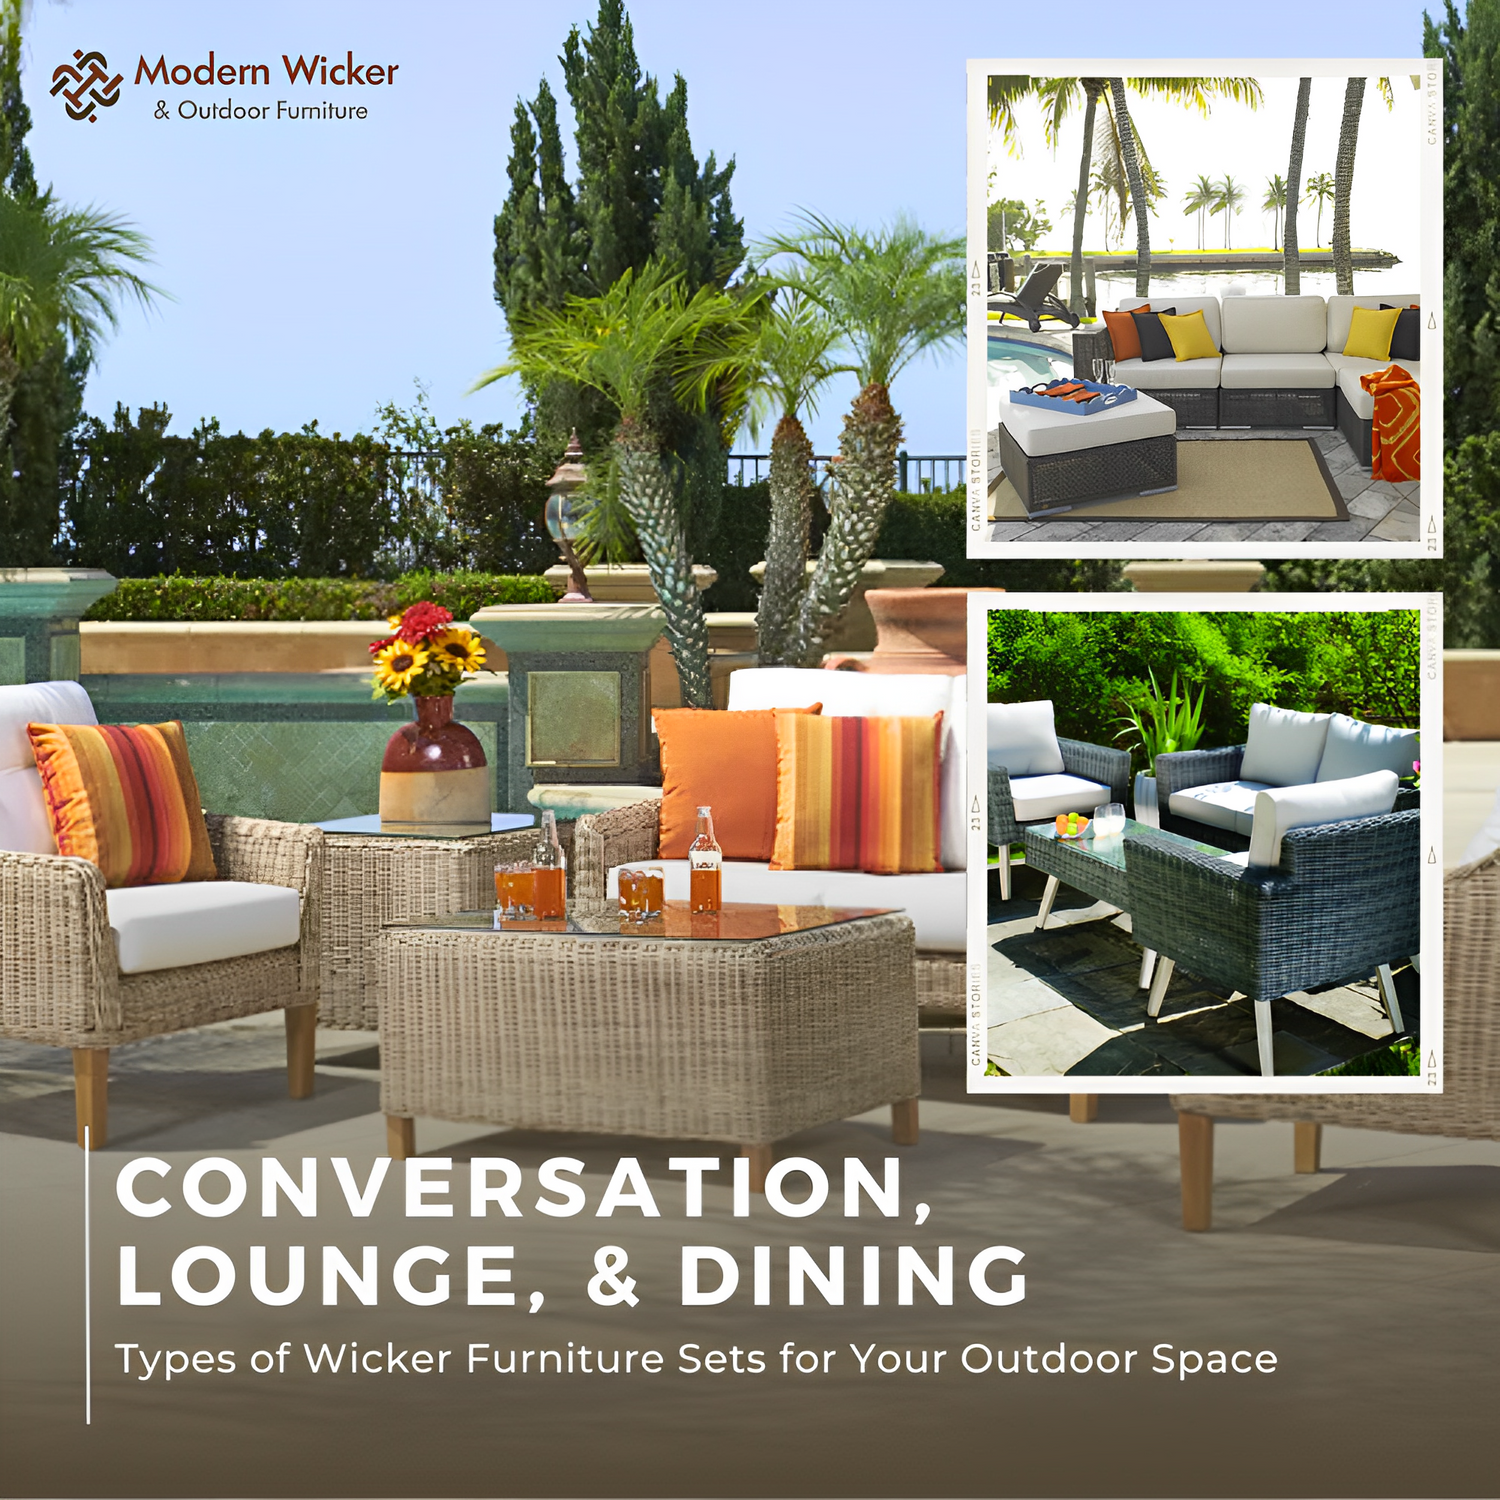 3 Types of Wicker Furniture Sets: Conversation, Lounge, & Dining